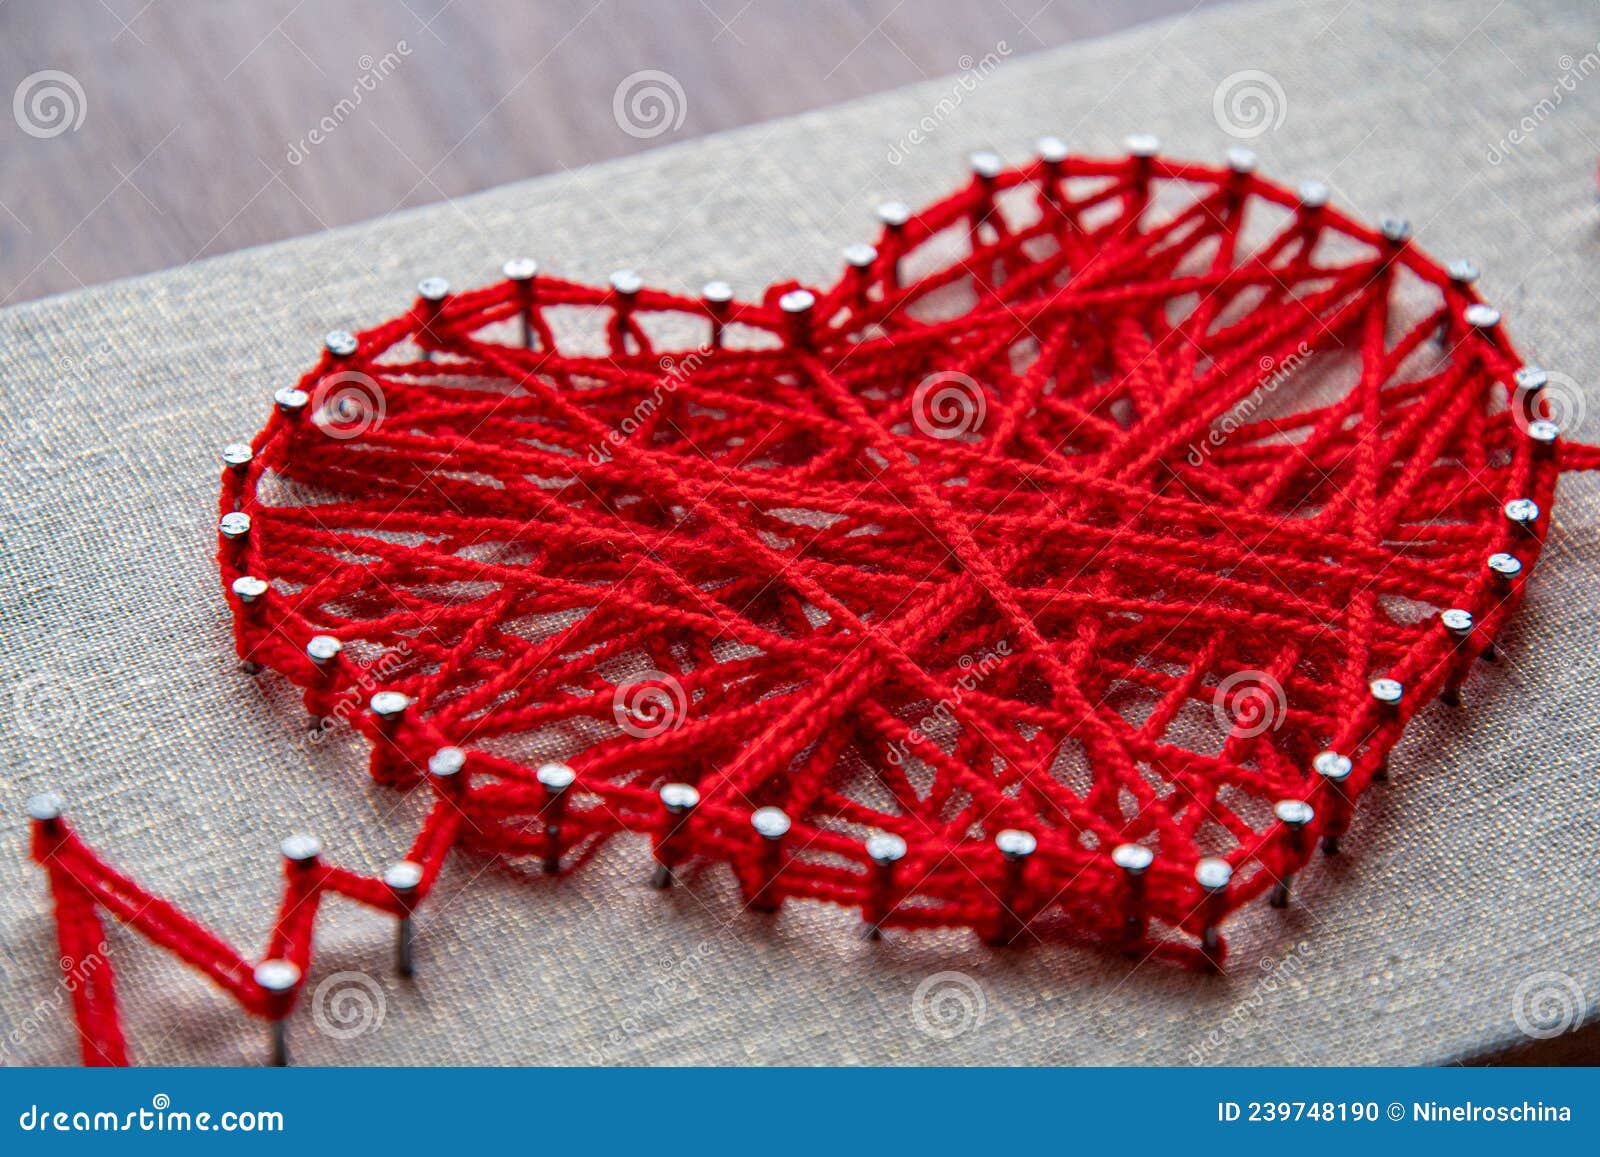 Red Heart String Art Made With Tangled Yarn On Metal Nails On Canvas  Background Stock Photo - Image Of Handmade, Decoration: 239748190